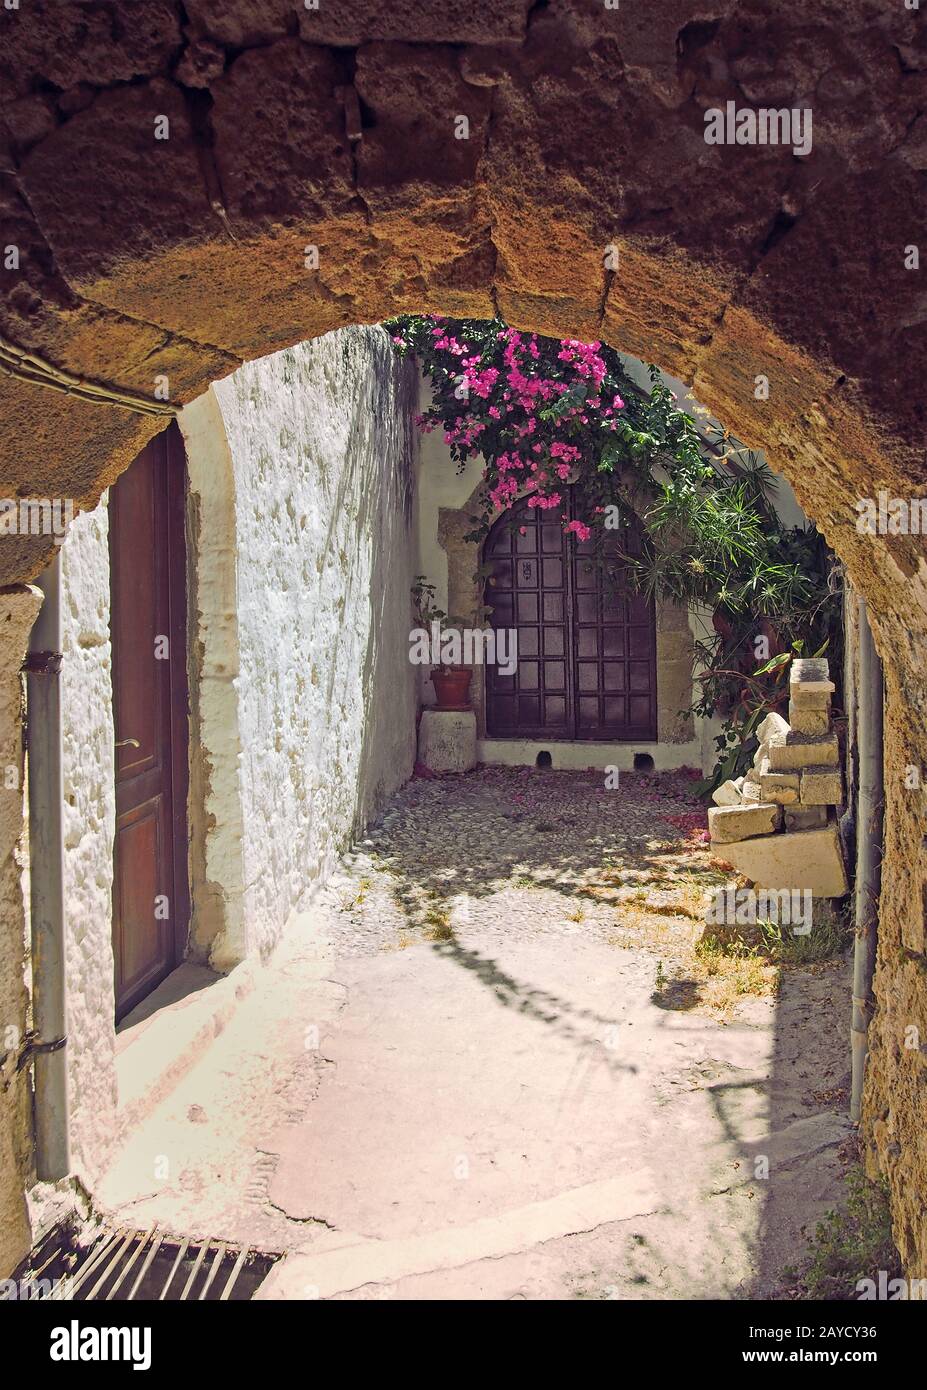 an ancient sunlit alleyway in rhodes town under a stone arch with ...